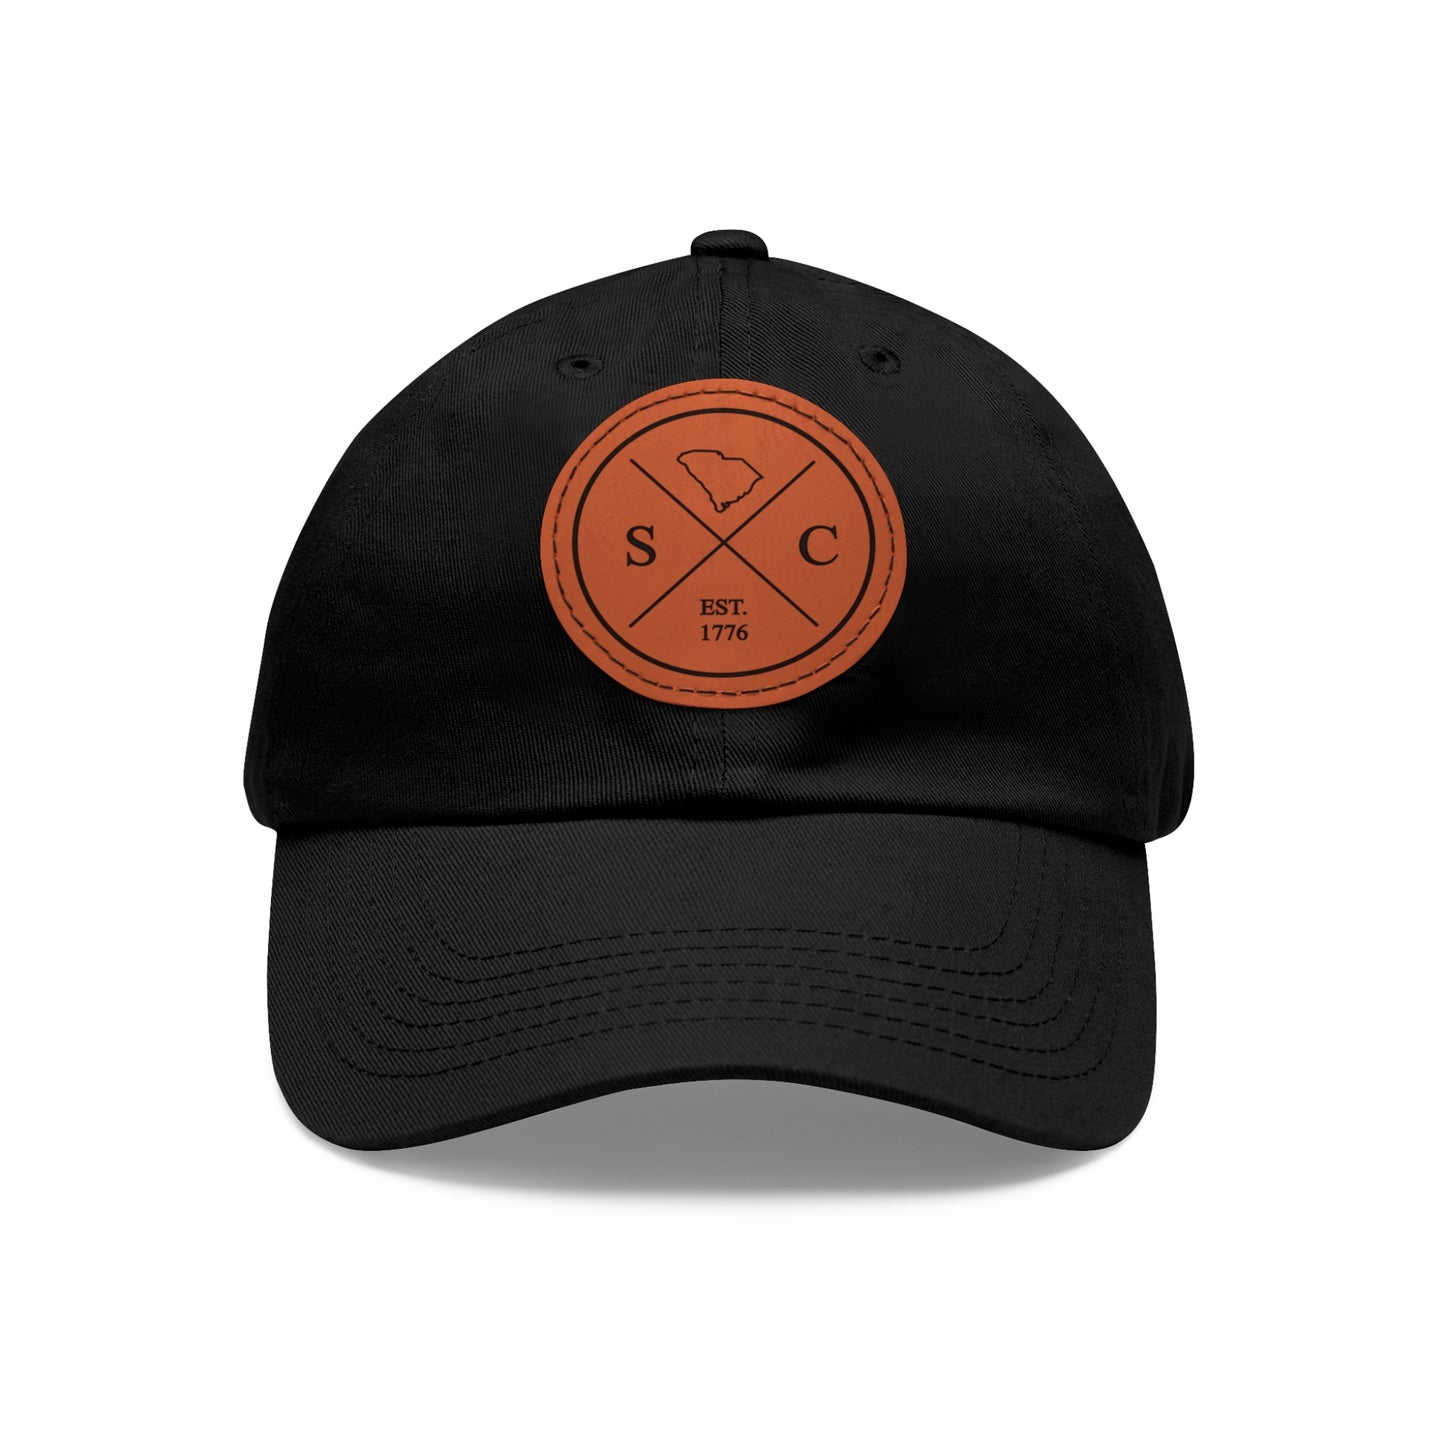 South Carolina Dad Hat with Leather Patch